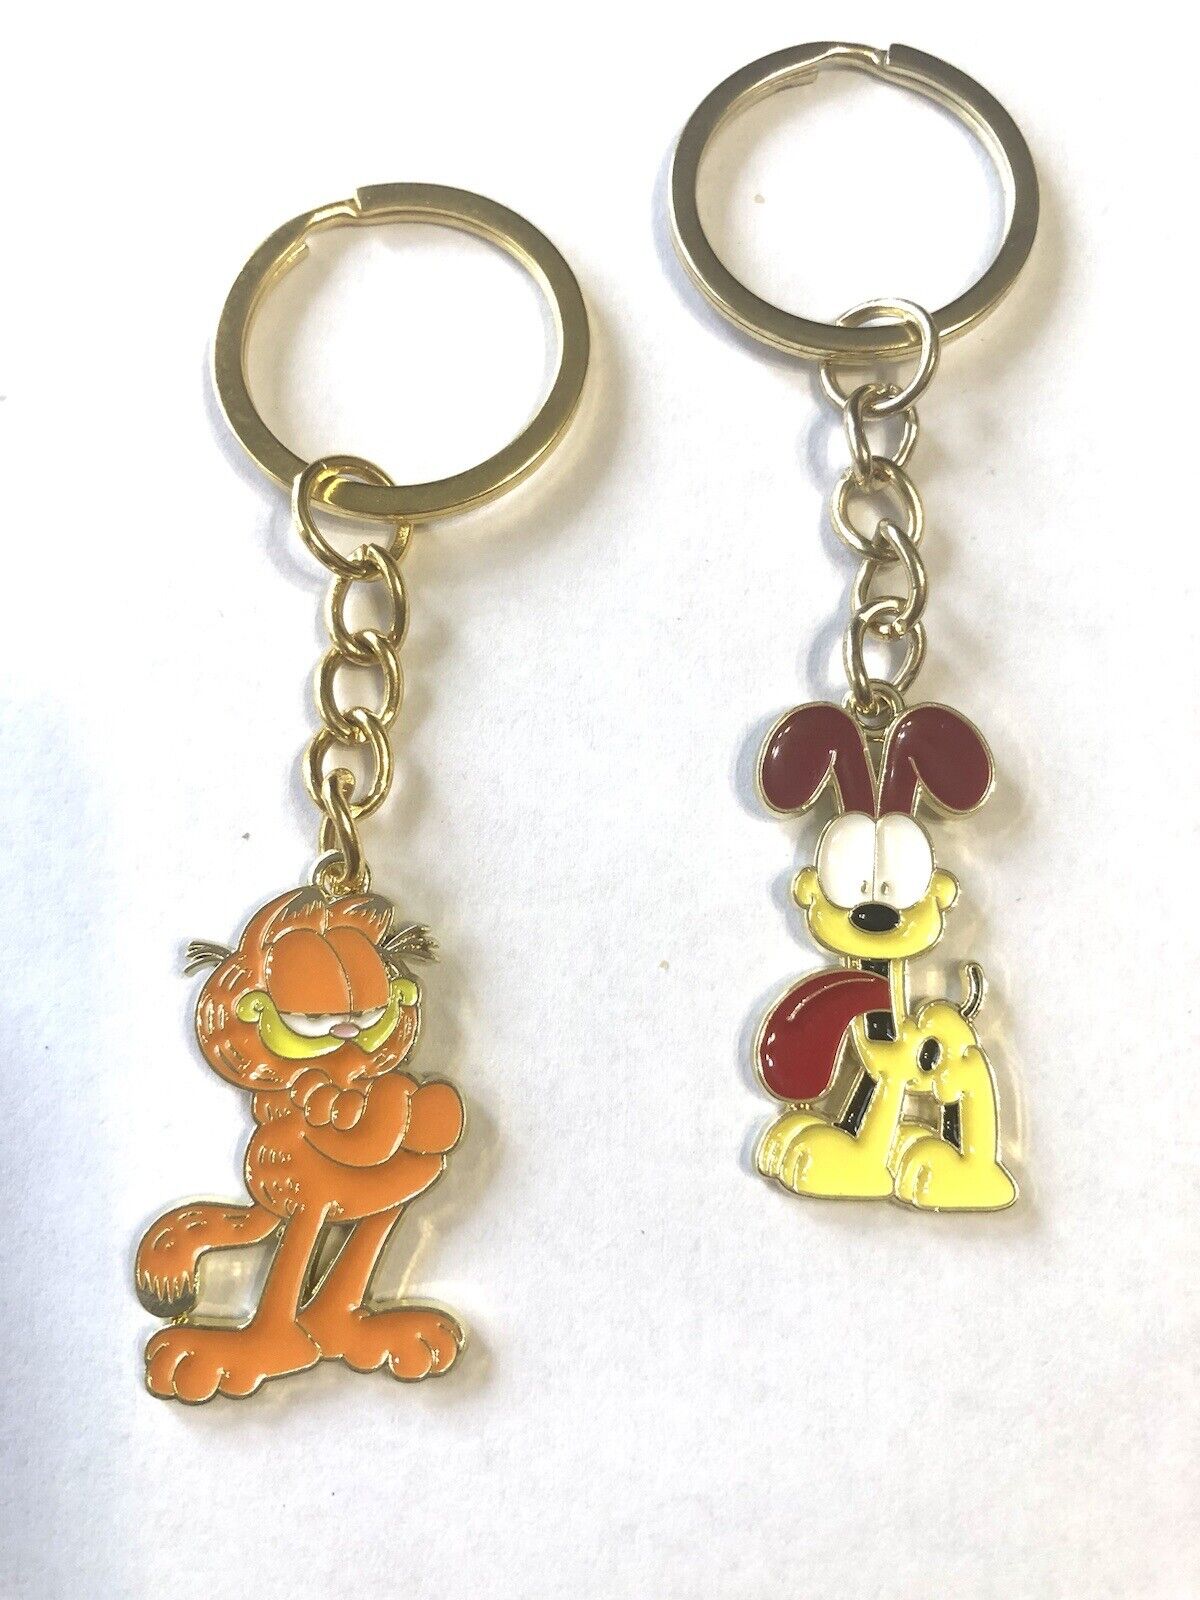 GARFIELD & ODIE Key Chains-enamel Charms Chain 1” Ring - US Seller 